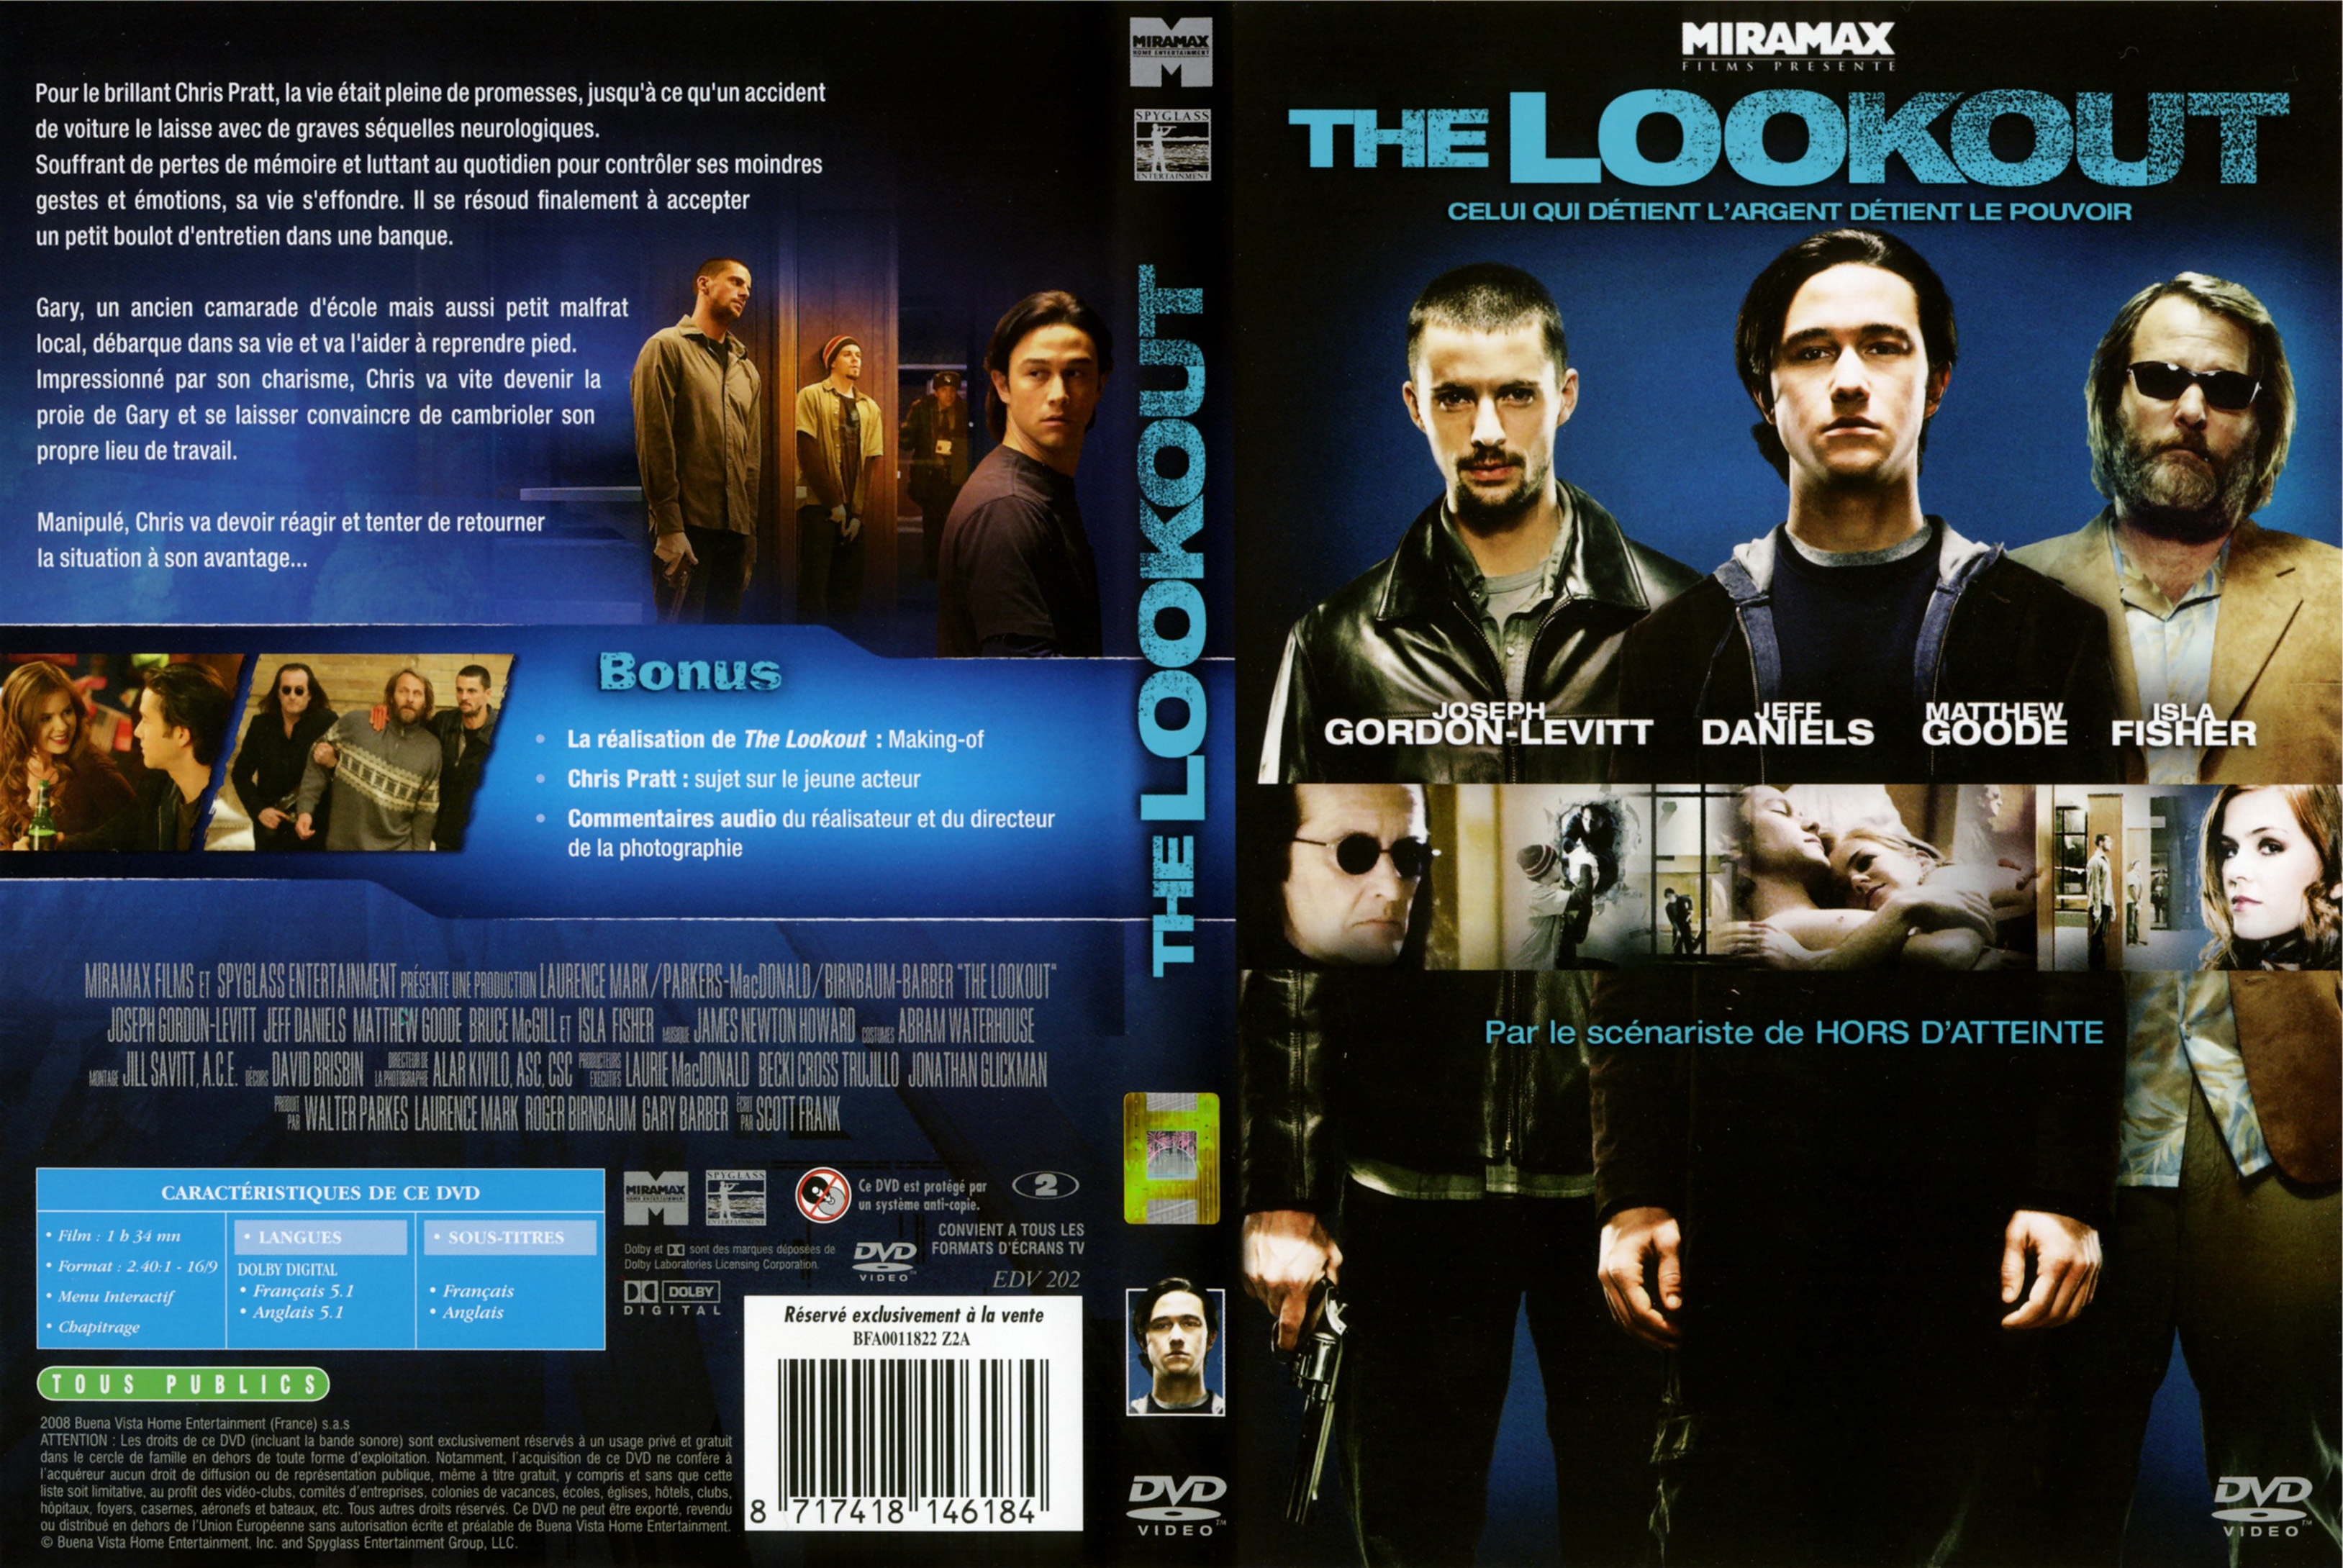 Jaquette DVD The lookout